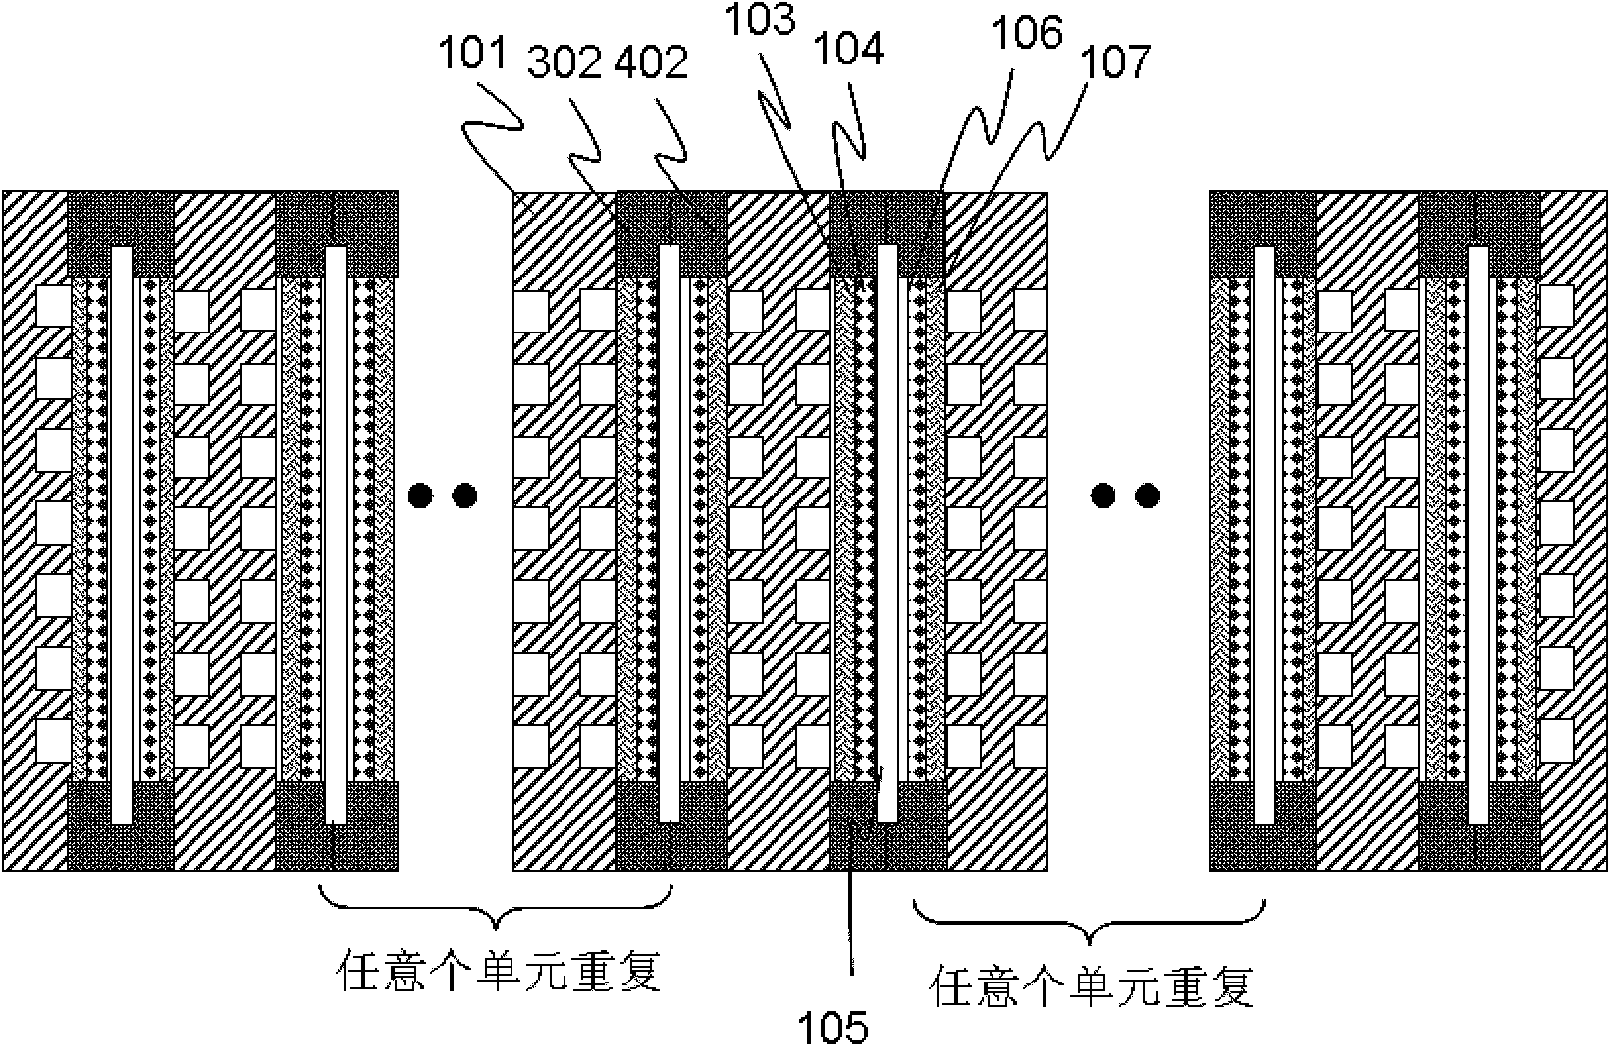 High-power lithium ion battery system with laminated battery structure